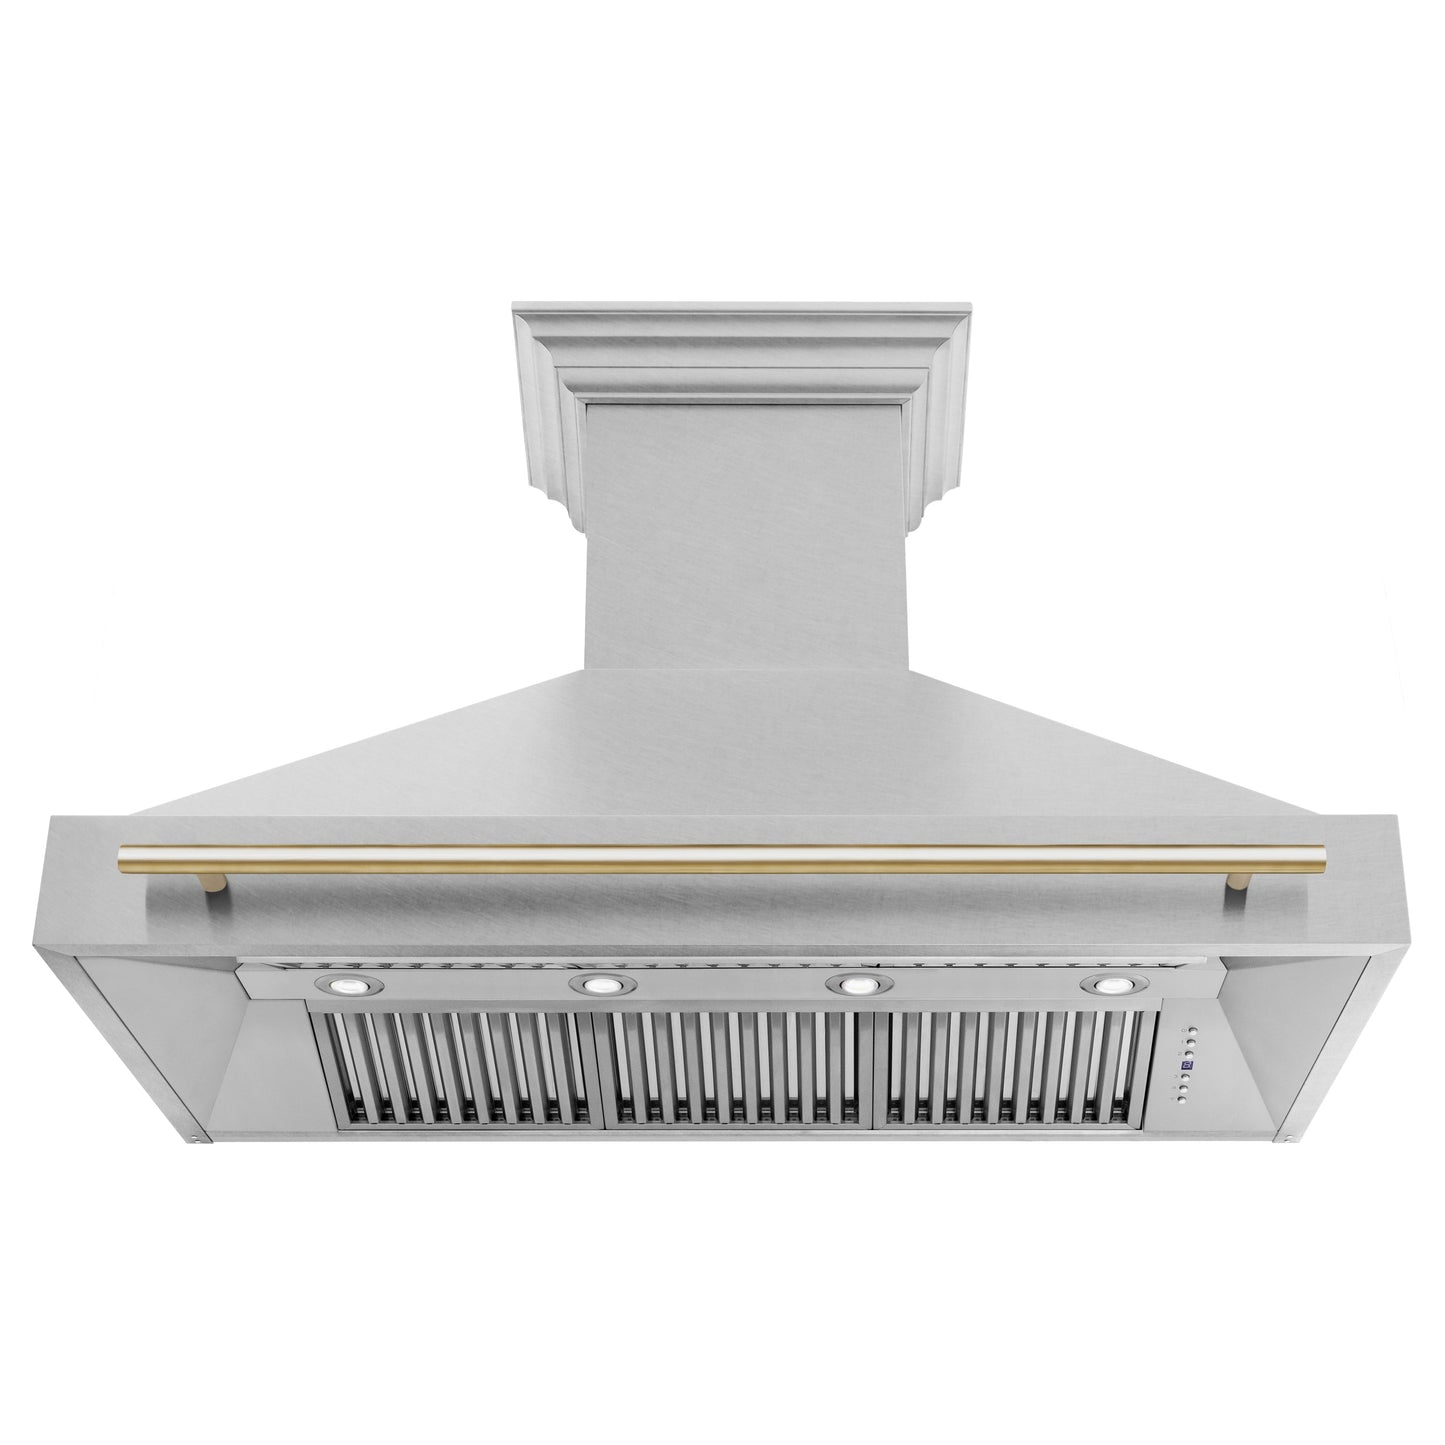 ZLINE Autograph Edition 48" DuraSnow Stainless Steel 4-speed 700 CFM Range Hood With LED Lighting and Gold Handle